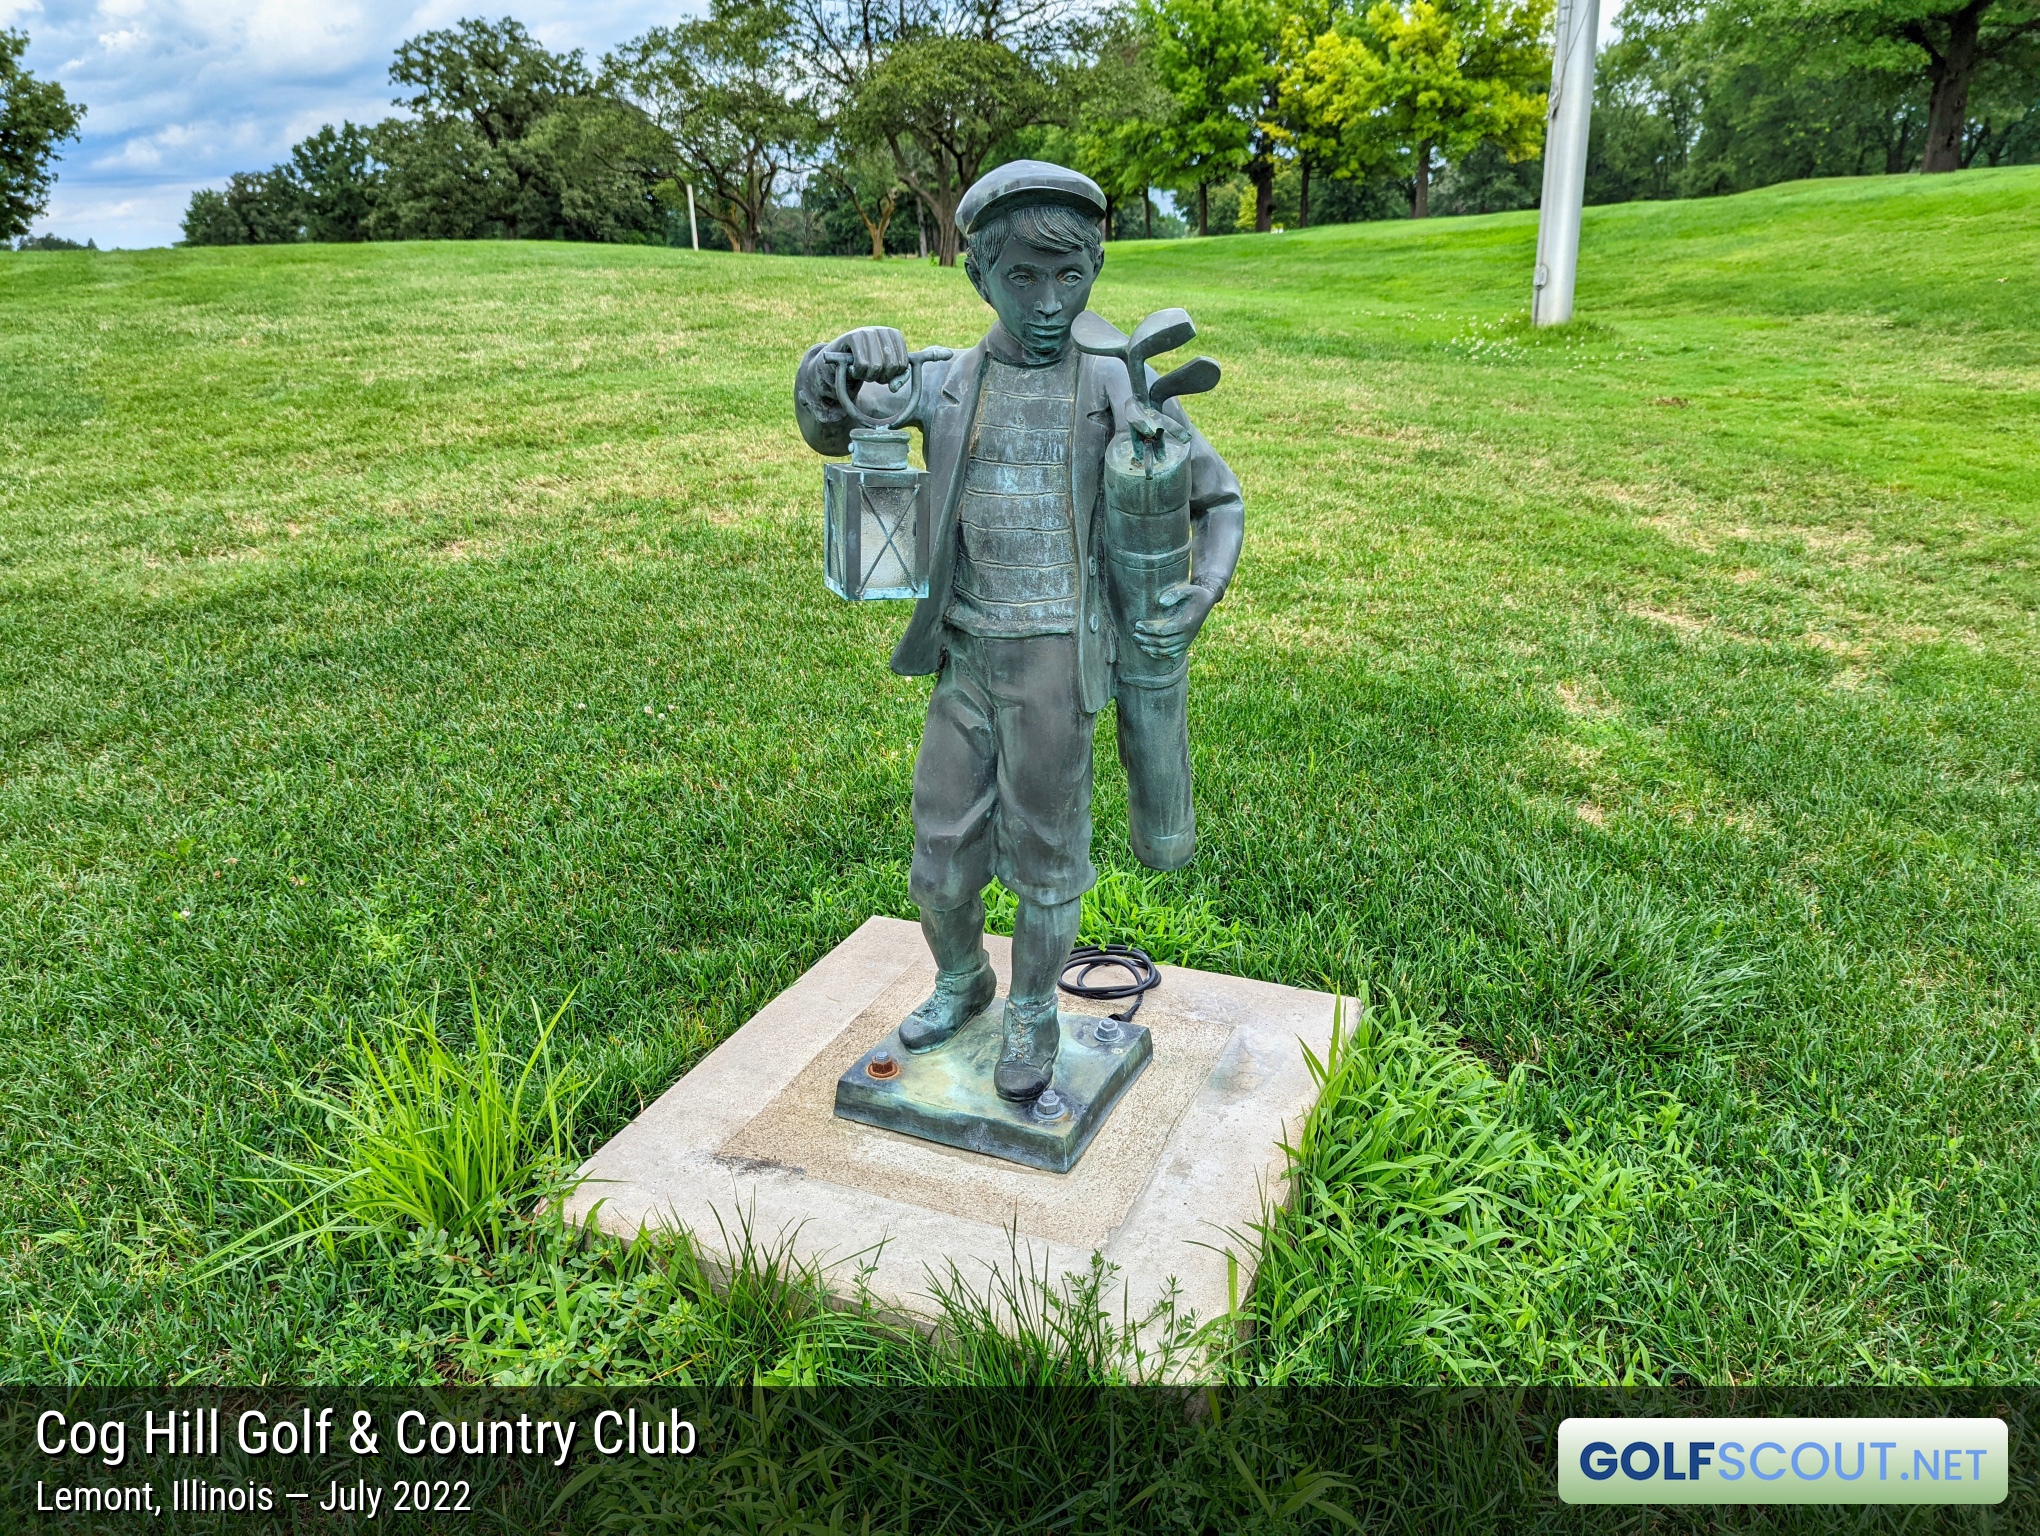 Miscellaneous photo of Cog Hill Course #3 in Lemont, Illinois. I'd love to know the backstory on this guy.